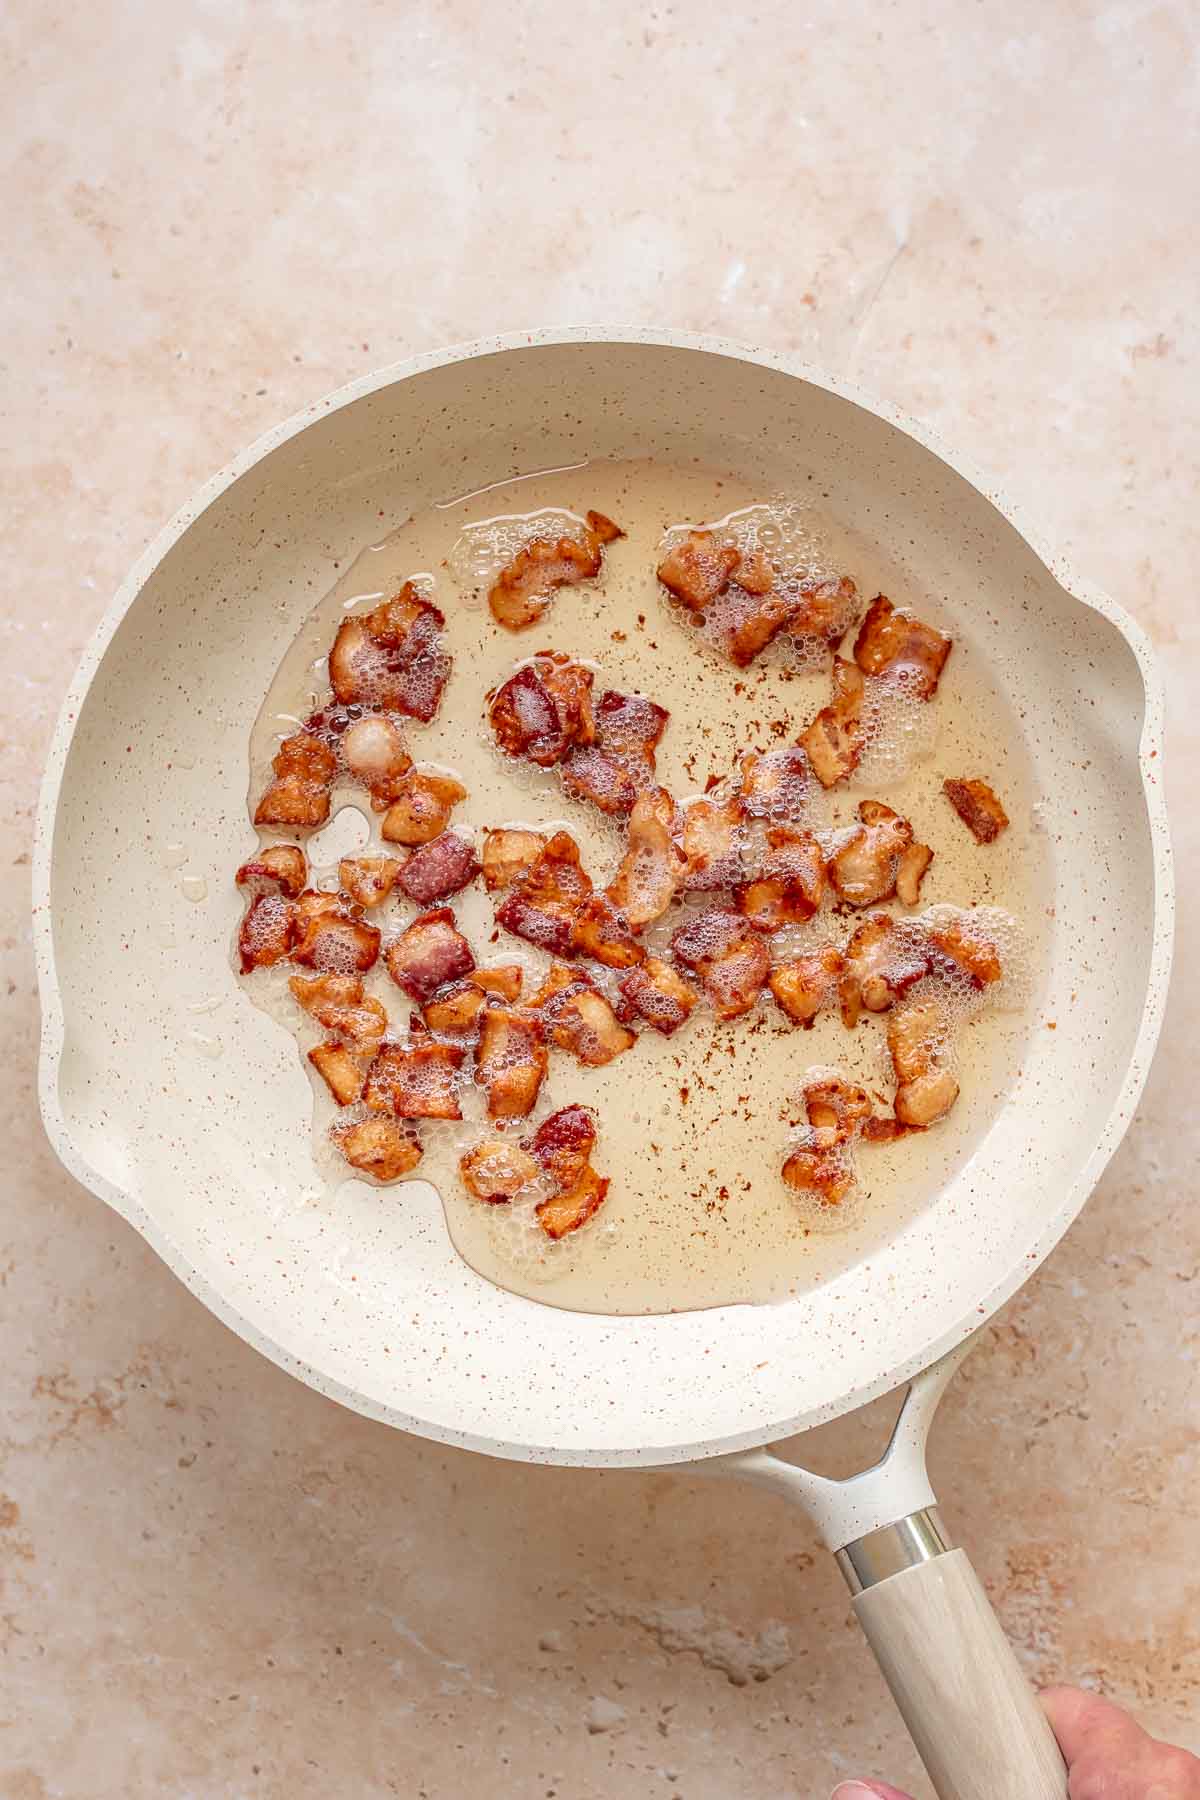 Bacon pieces frying in a pan.